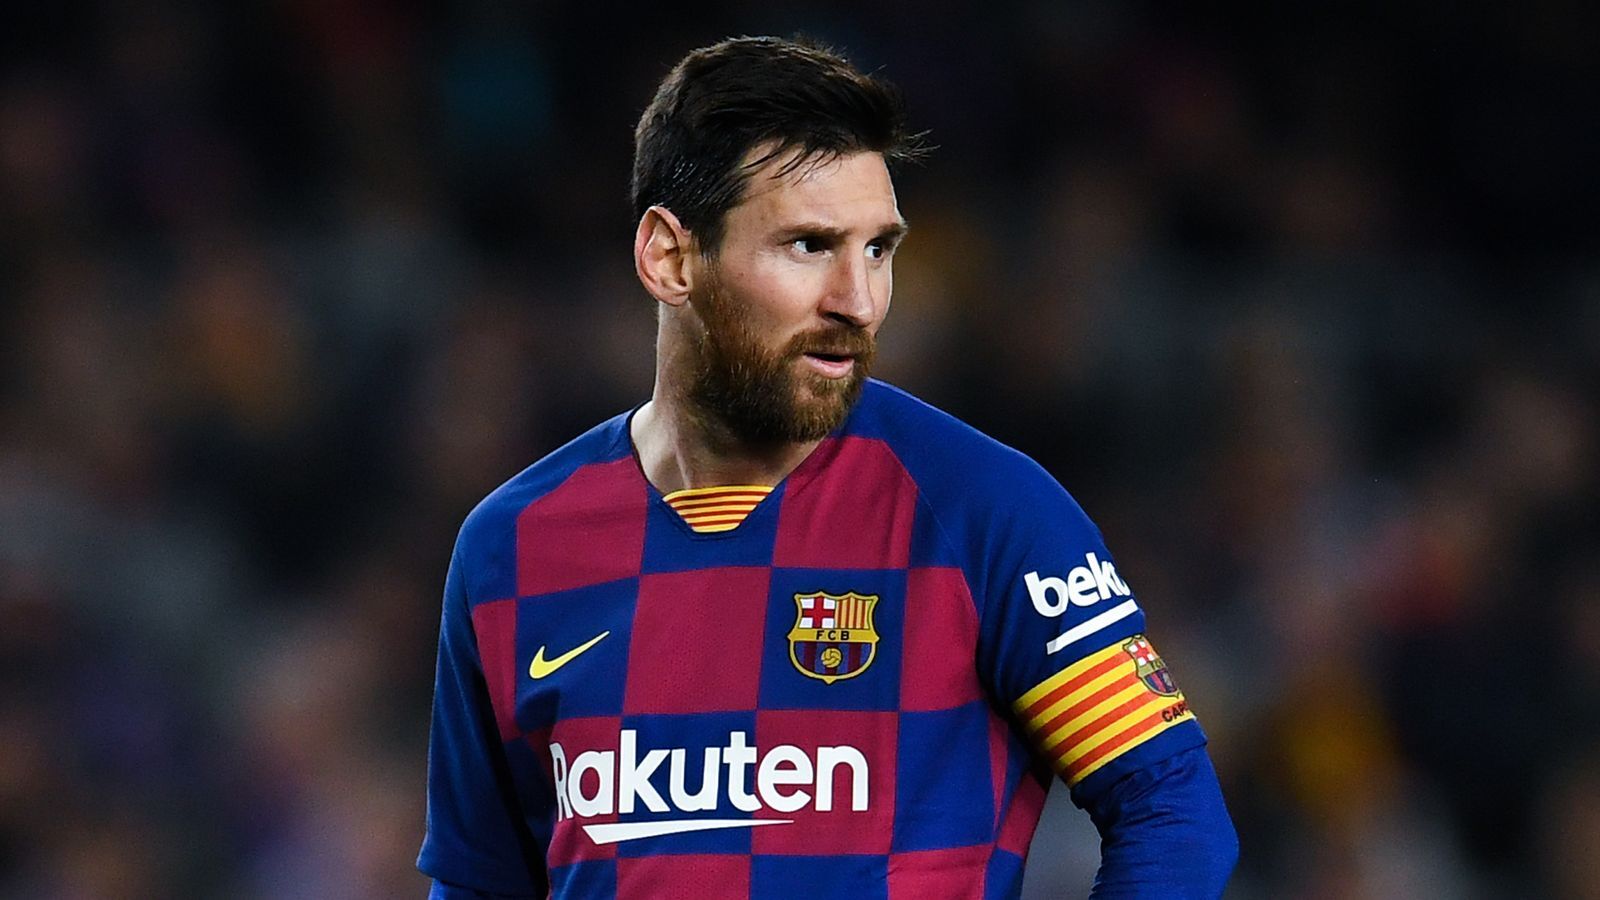 Quique Setien says he did not hear about Messi departure from Barcelona